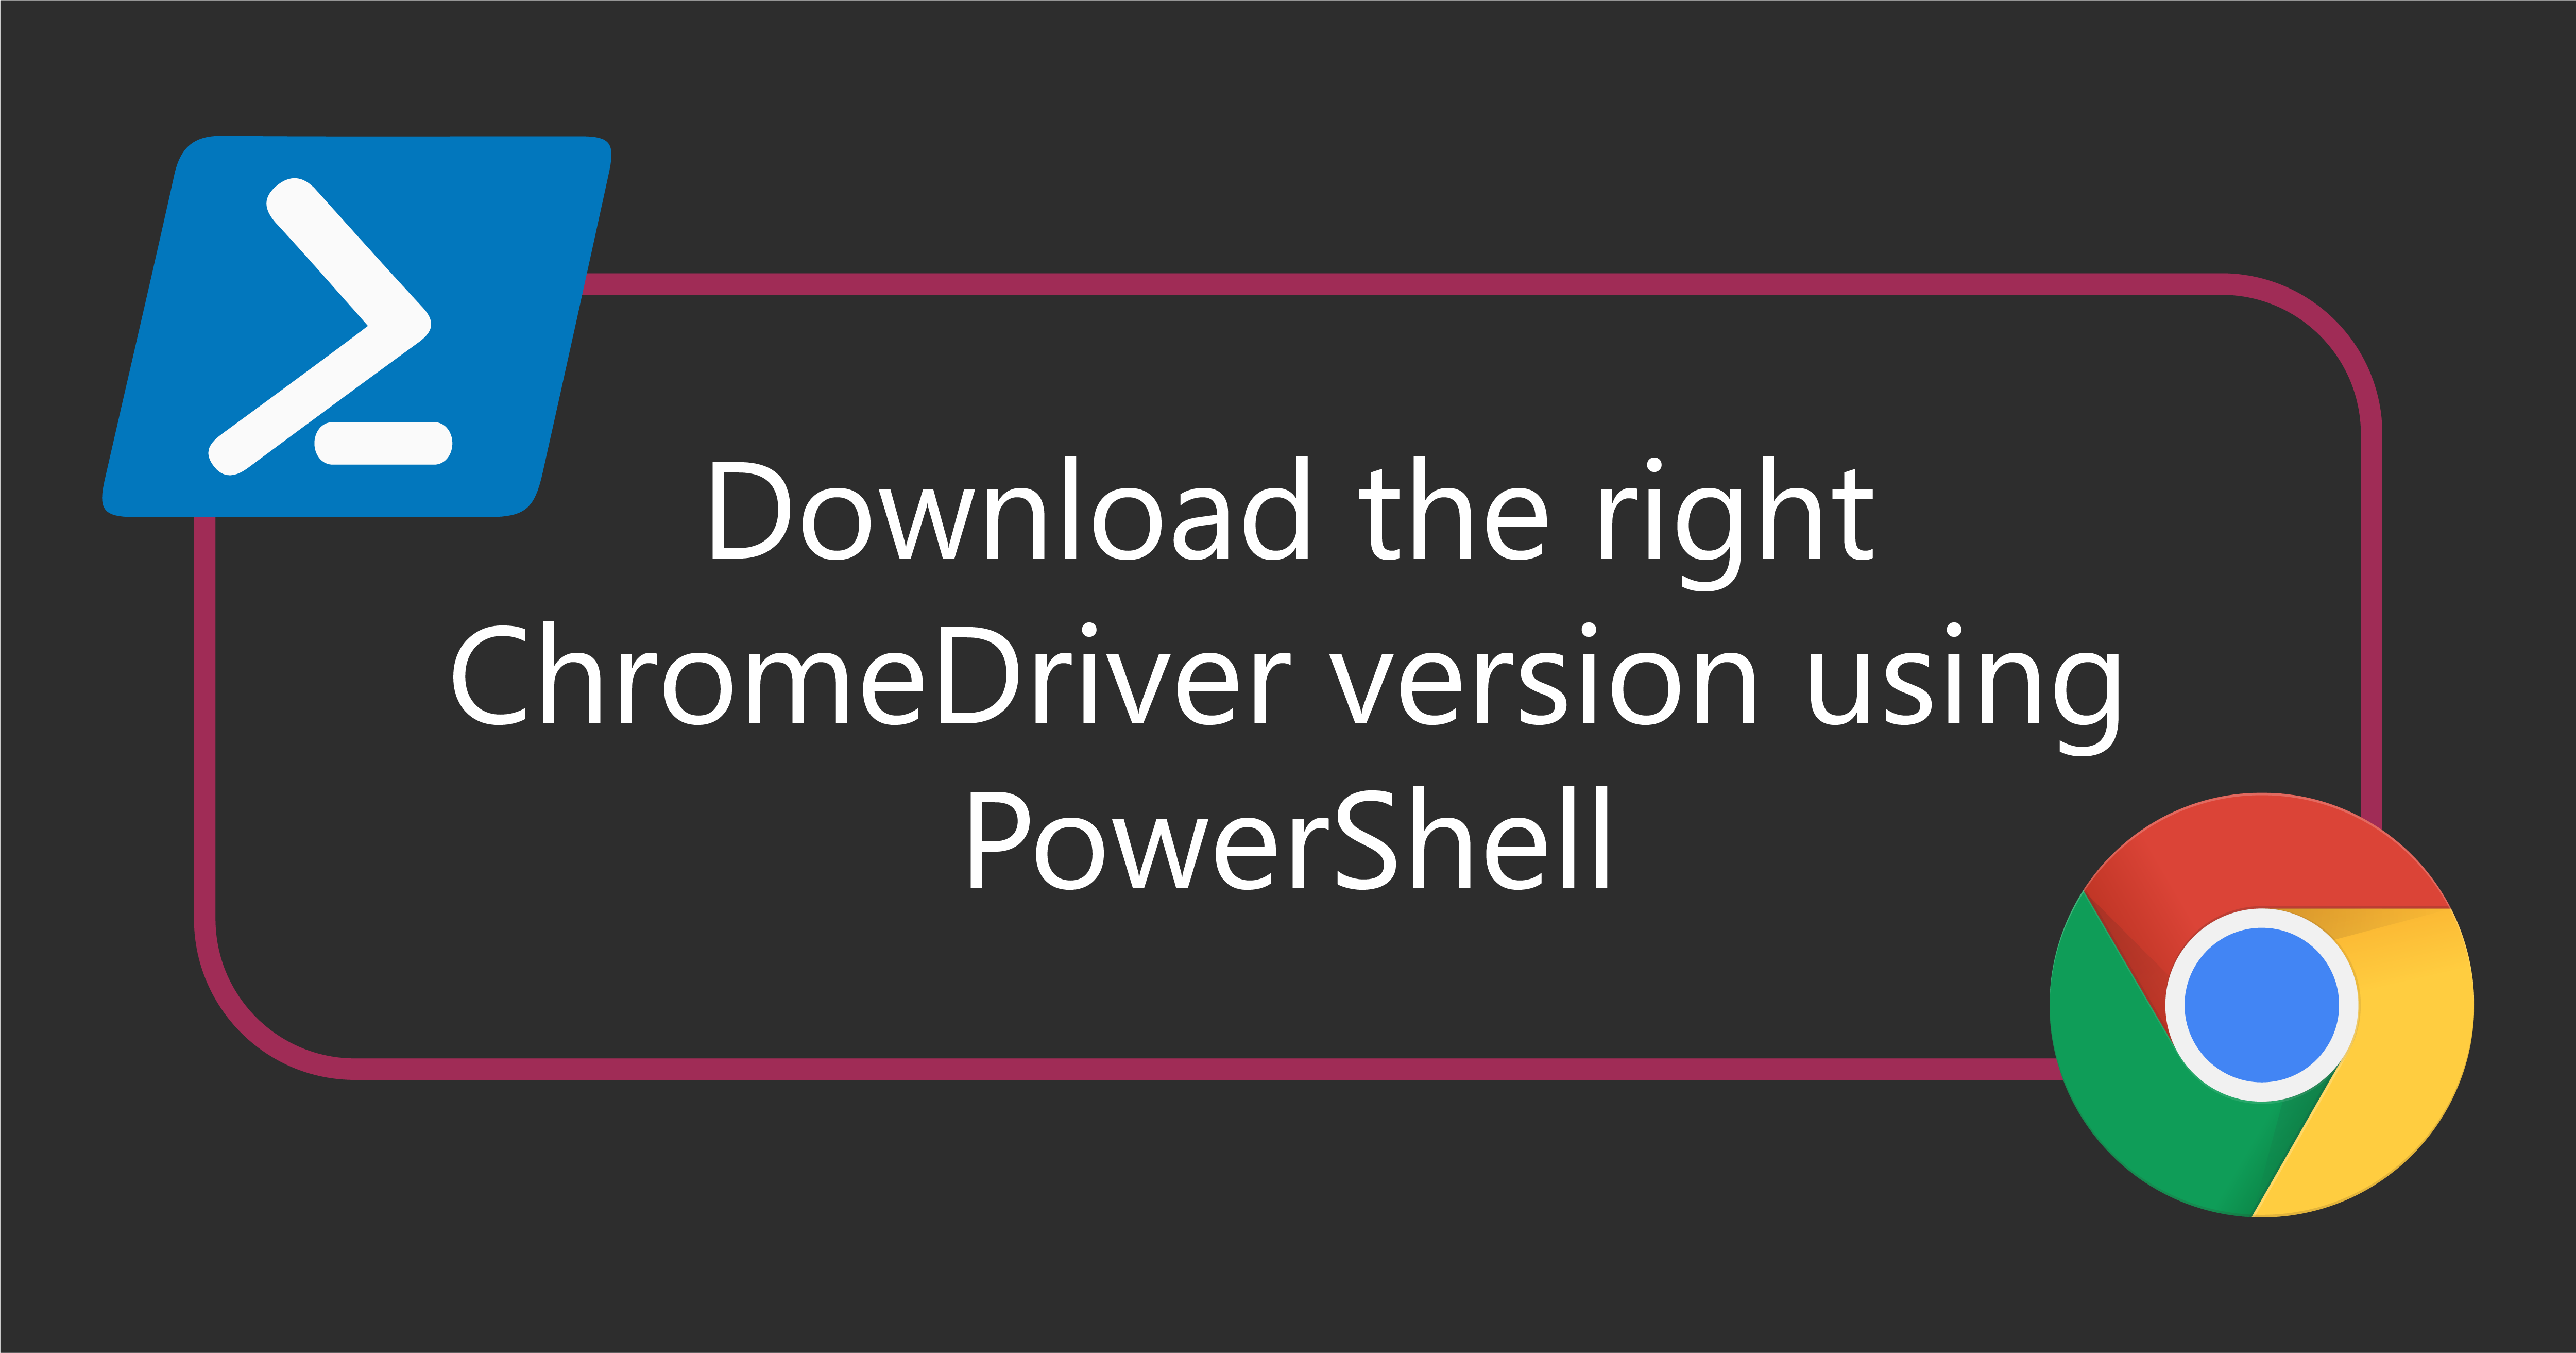 chromedriver exe download linux